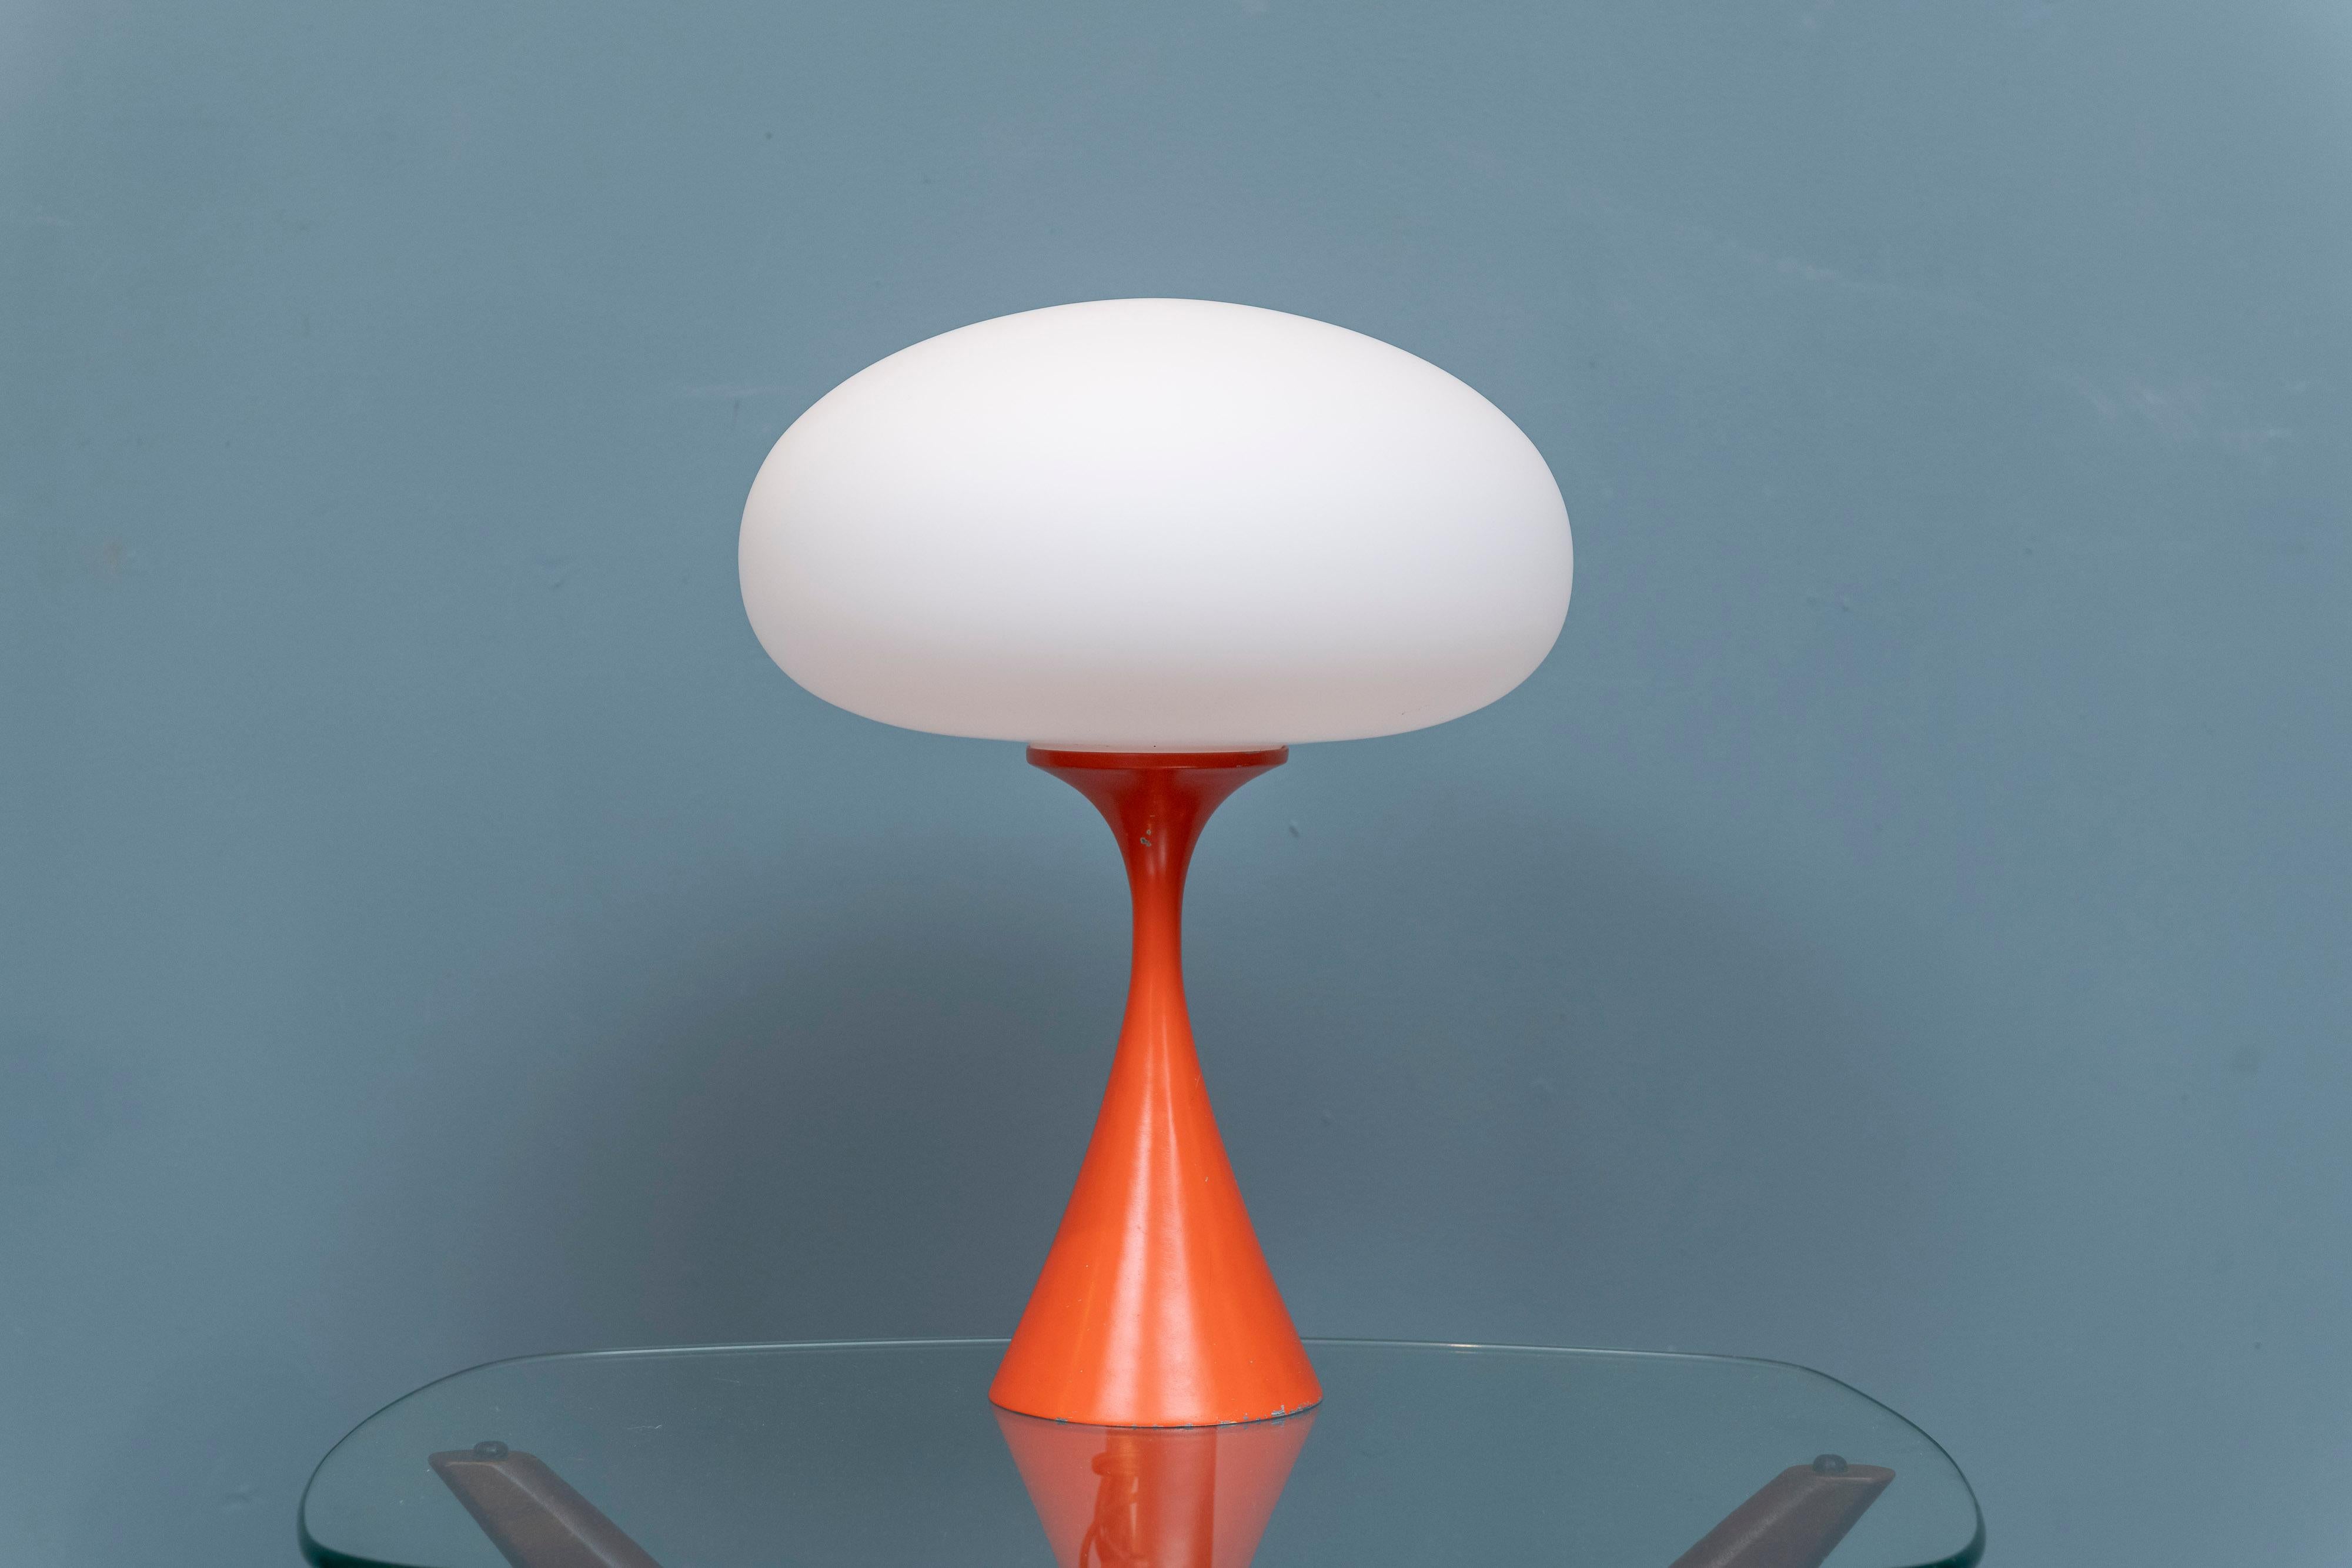 Laurel Lamp Company orange mushroom table lamp, U.S.A. Timeless modern design in a bright orange enamel with opaline glass shade. Has a three way socket for wattage variety 40-60-75 etc. base shows expected signs of use and wear but still presents